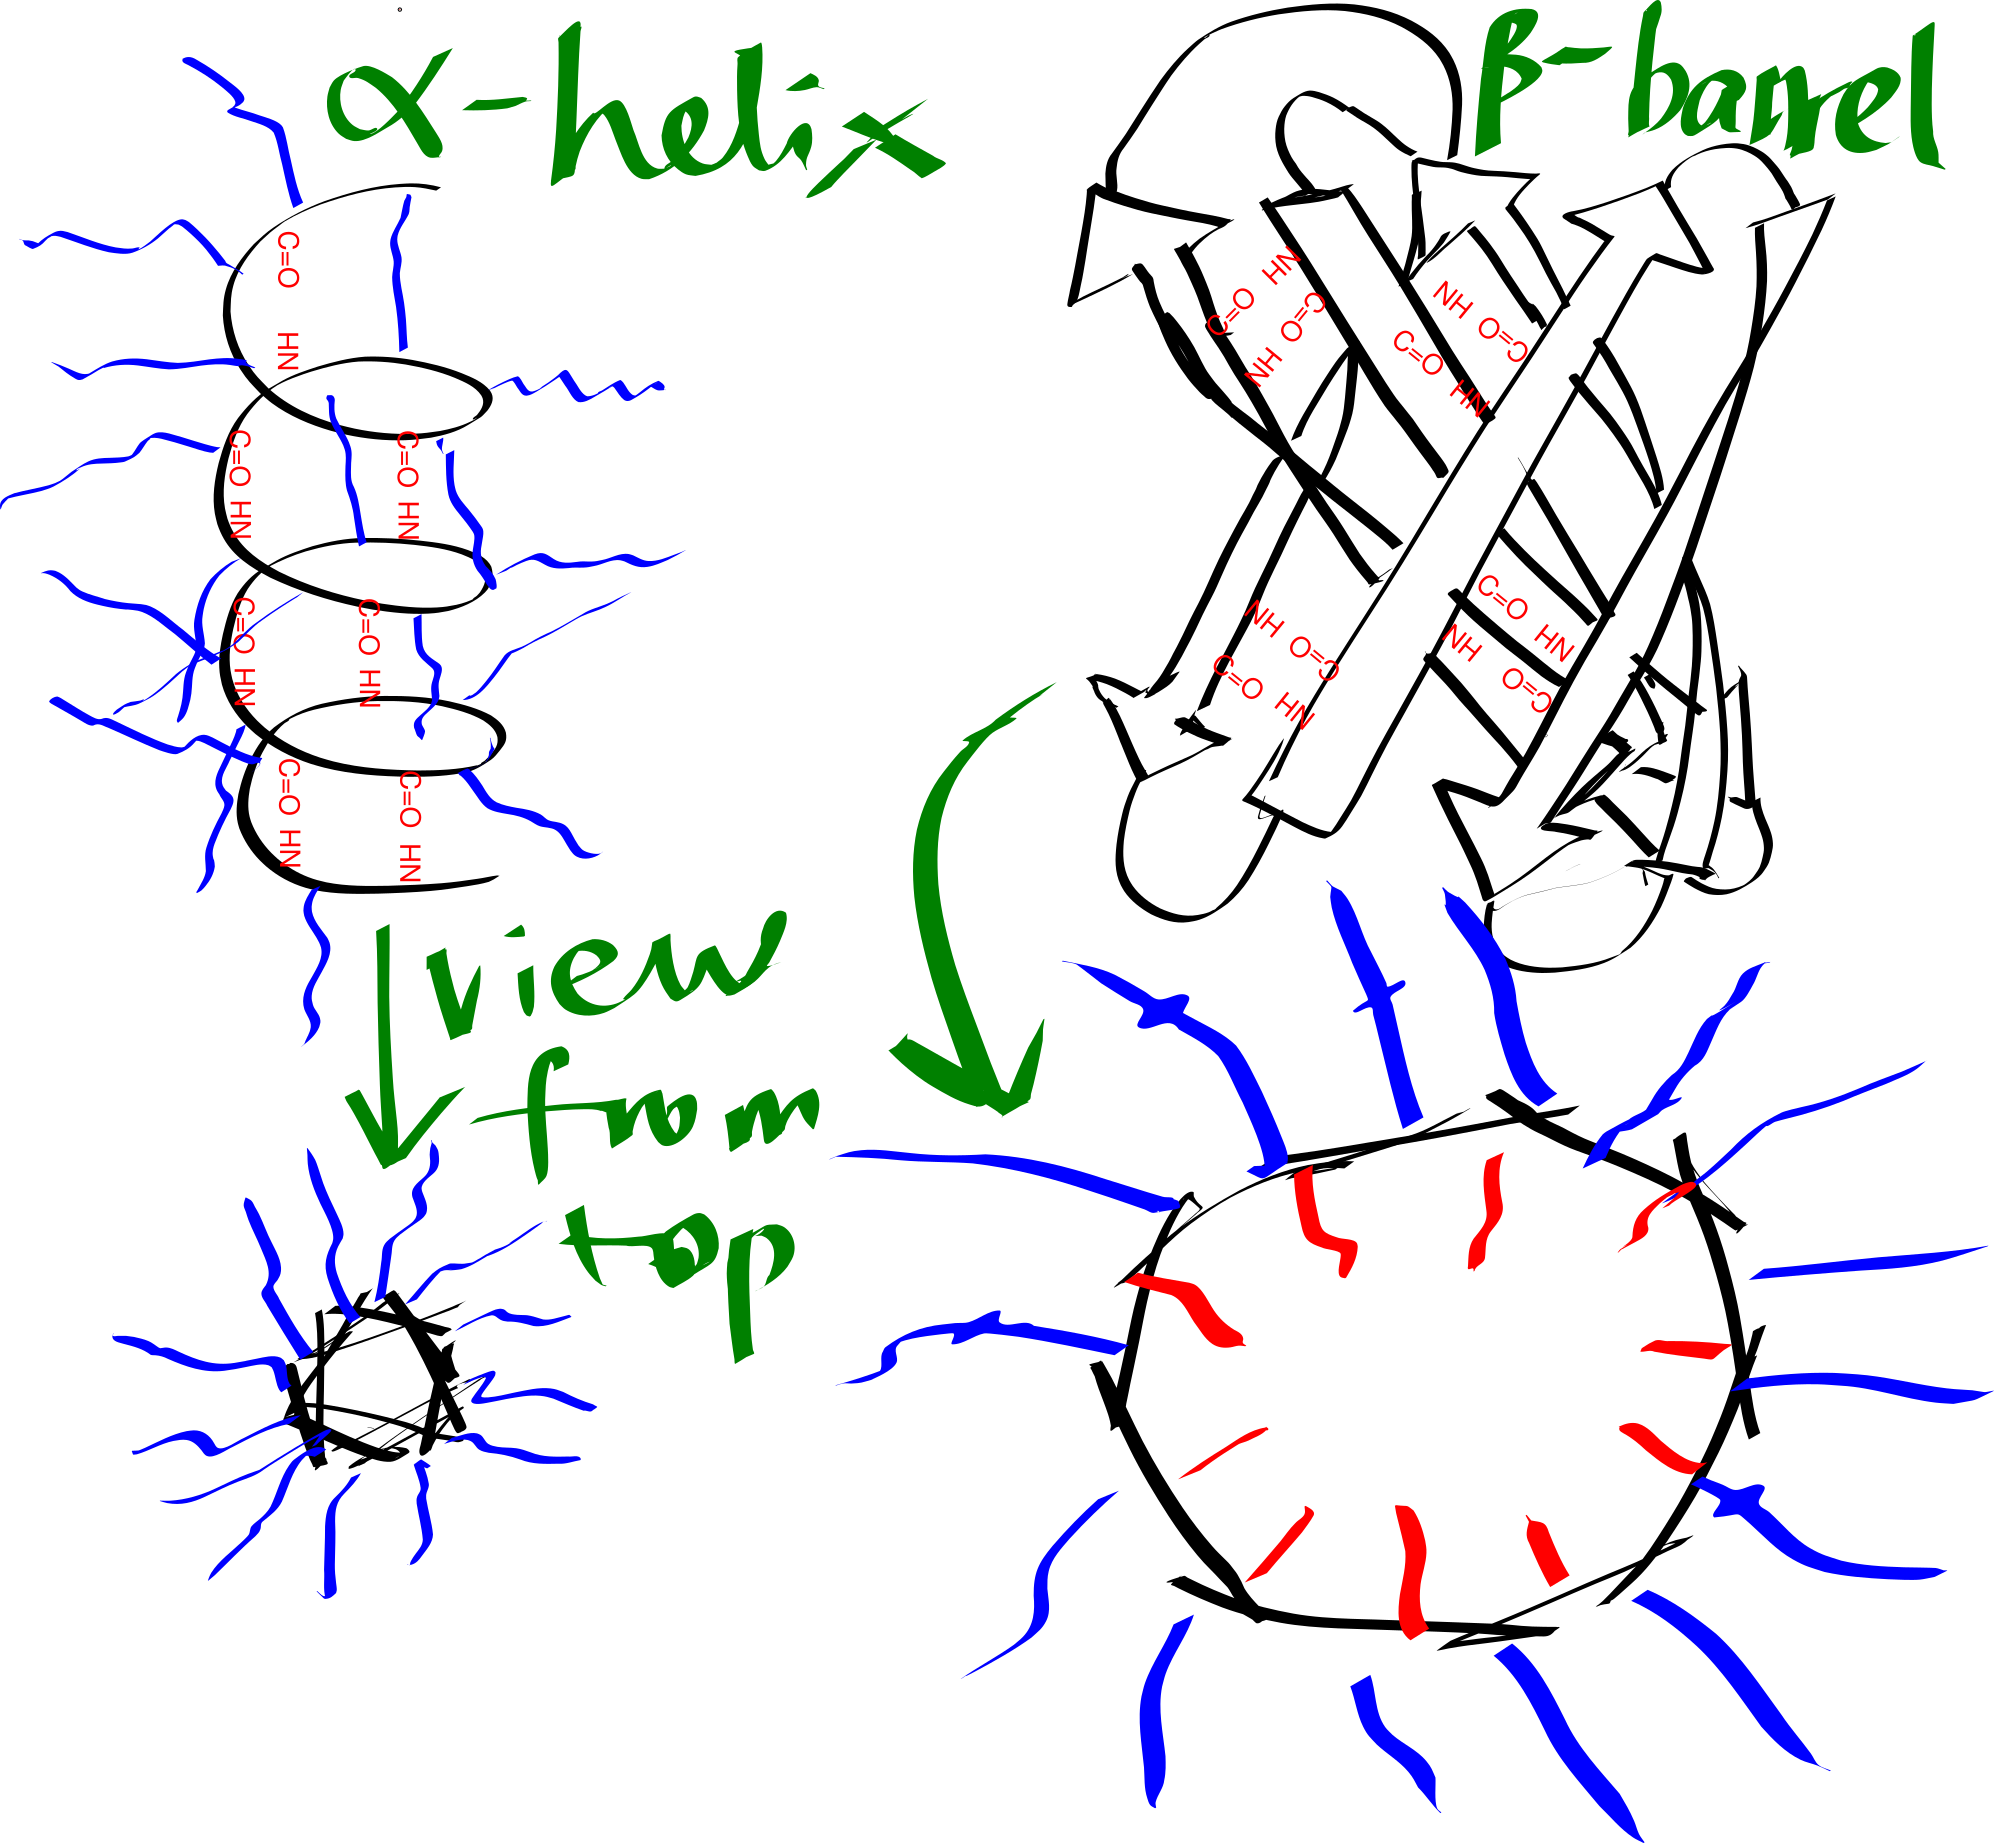 Schematic representation of an alpha helix and a beta barrel. Blue and red lines represent hydrophobic and hydrophilic side chains, respectively.